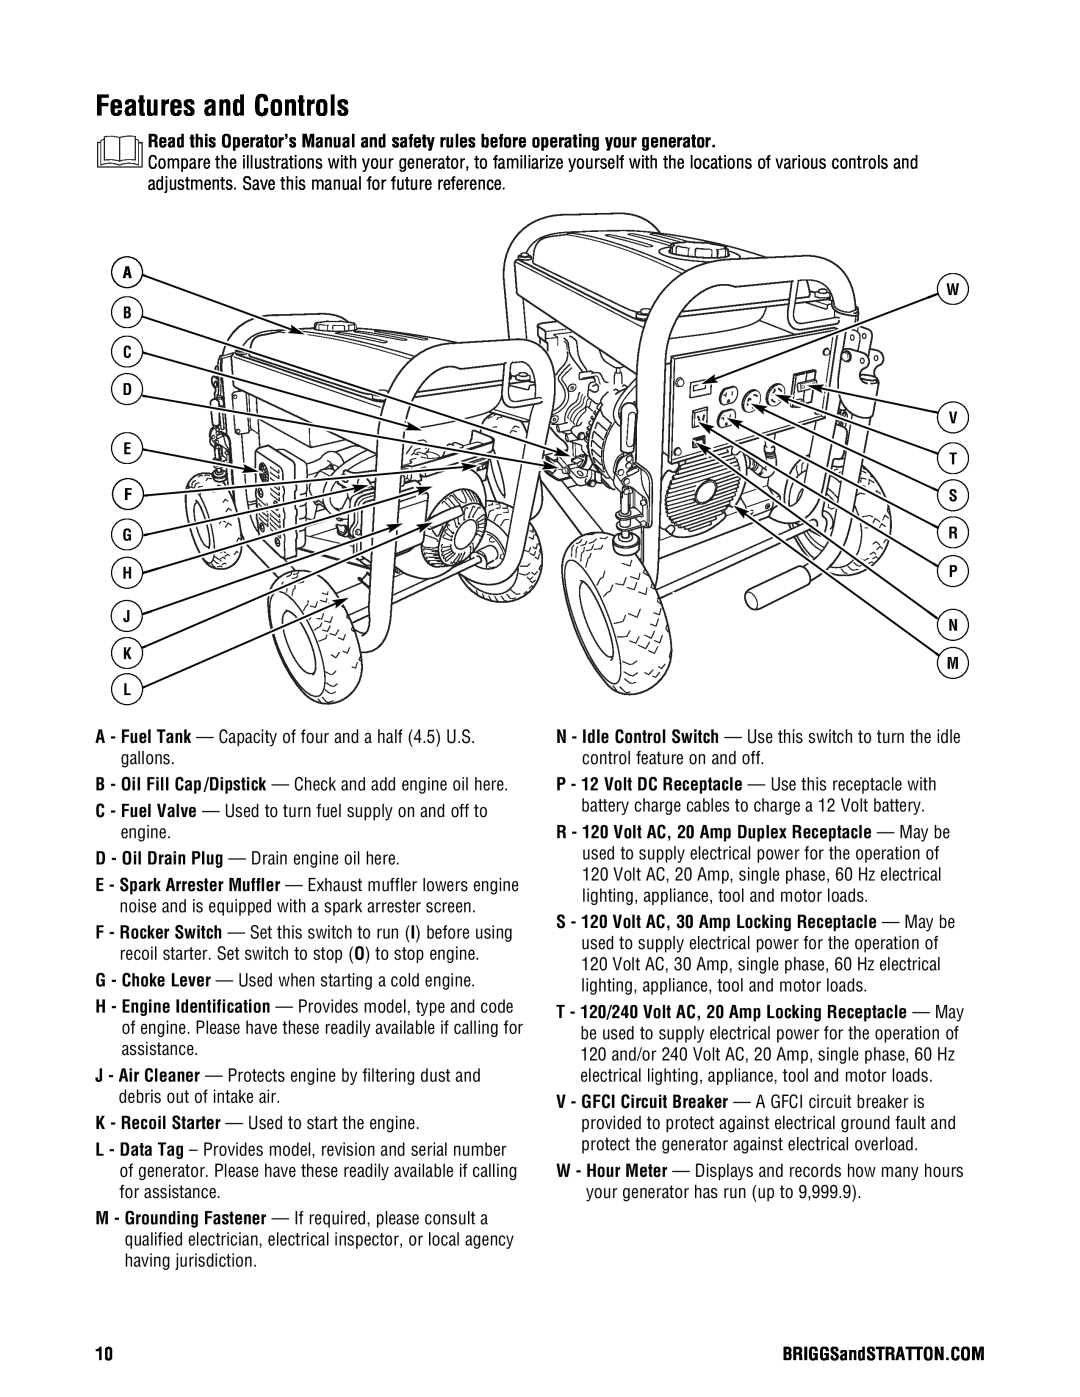 Briggs & Stratton PRO4000 manual Features and Controls 